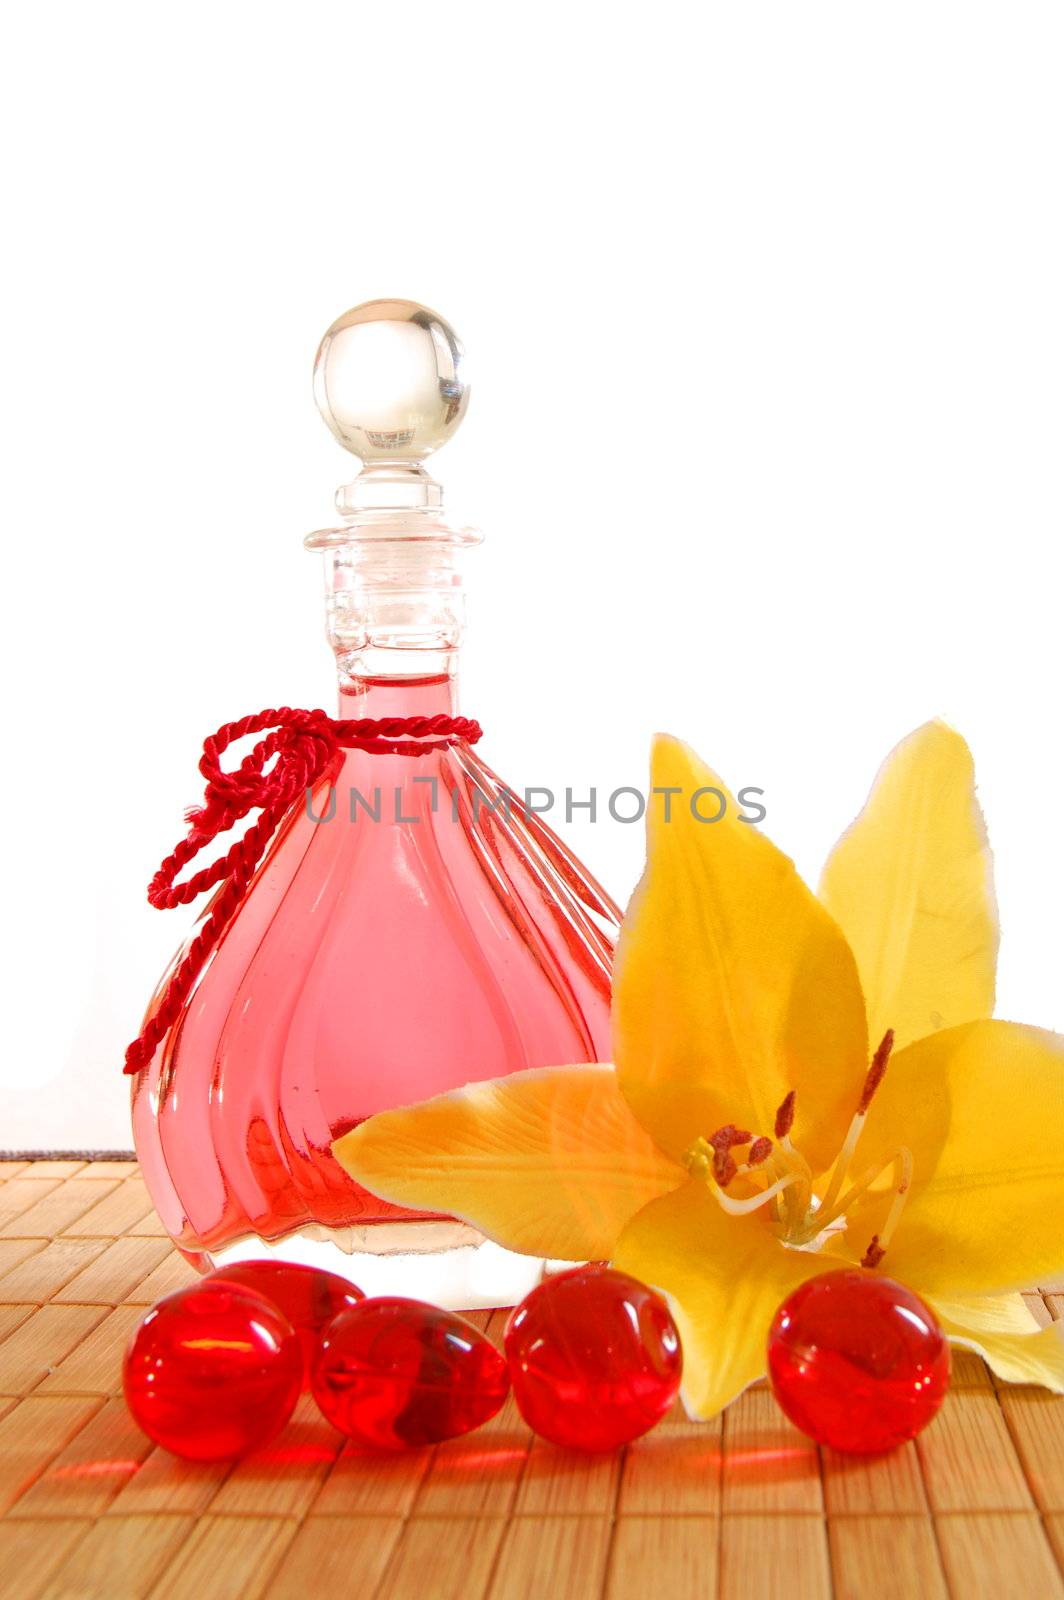 bottle of massage oil showing concept of spa and relaxation